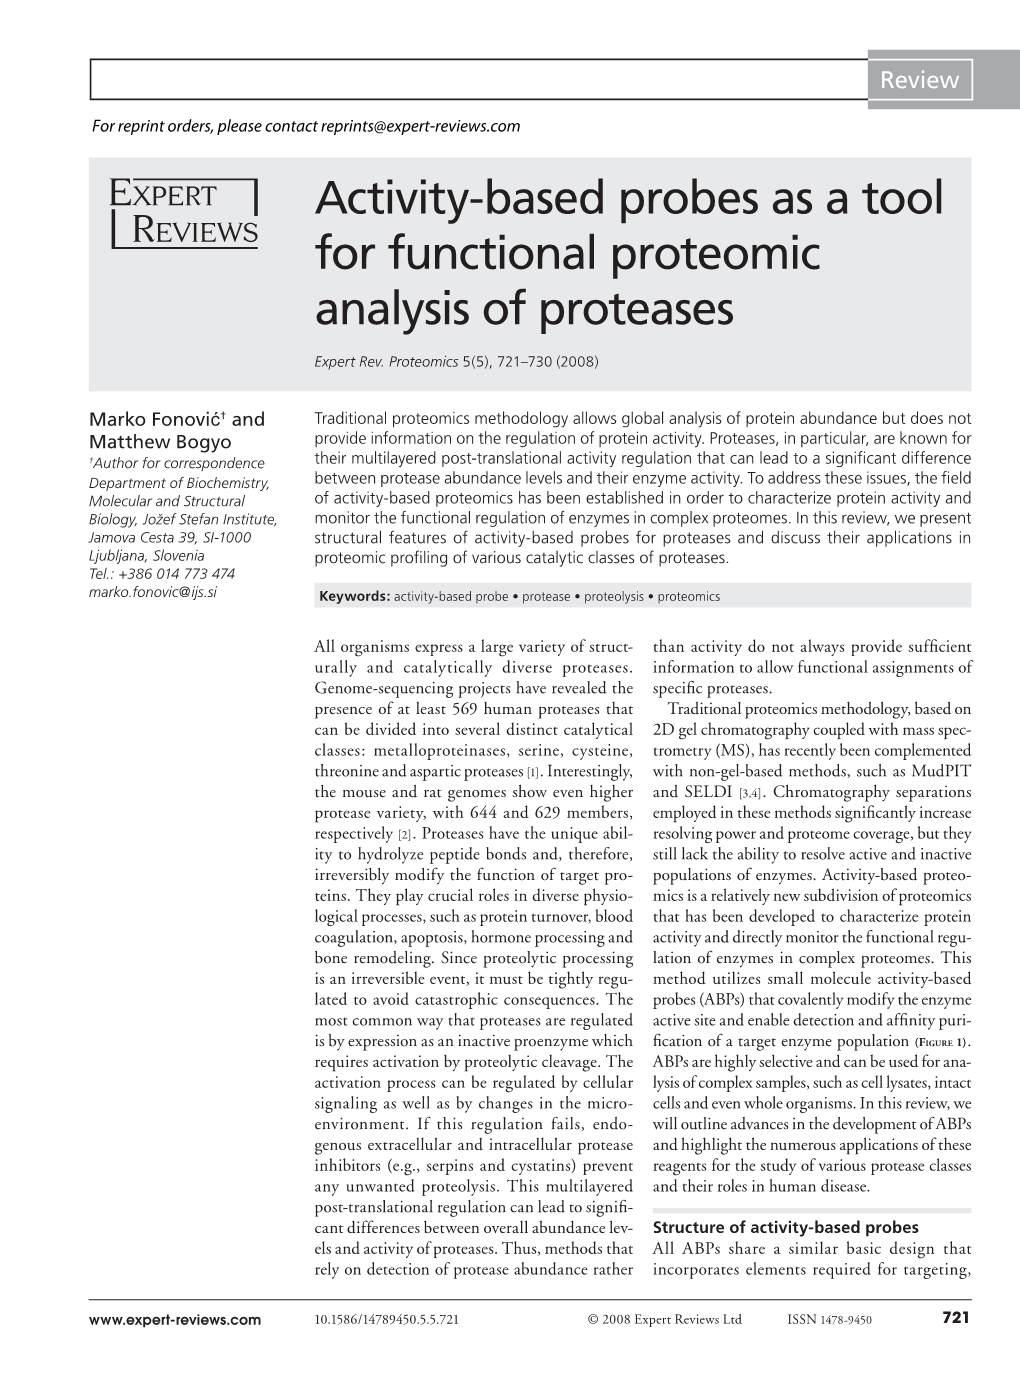 Activity-Based Probes As a Tool for Functional Proteomic Analysis of Proteases